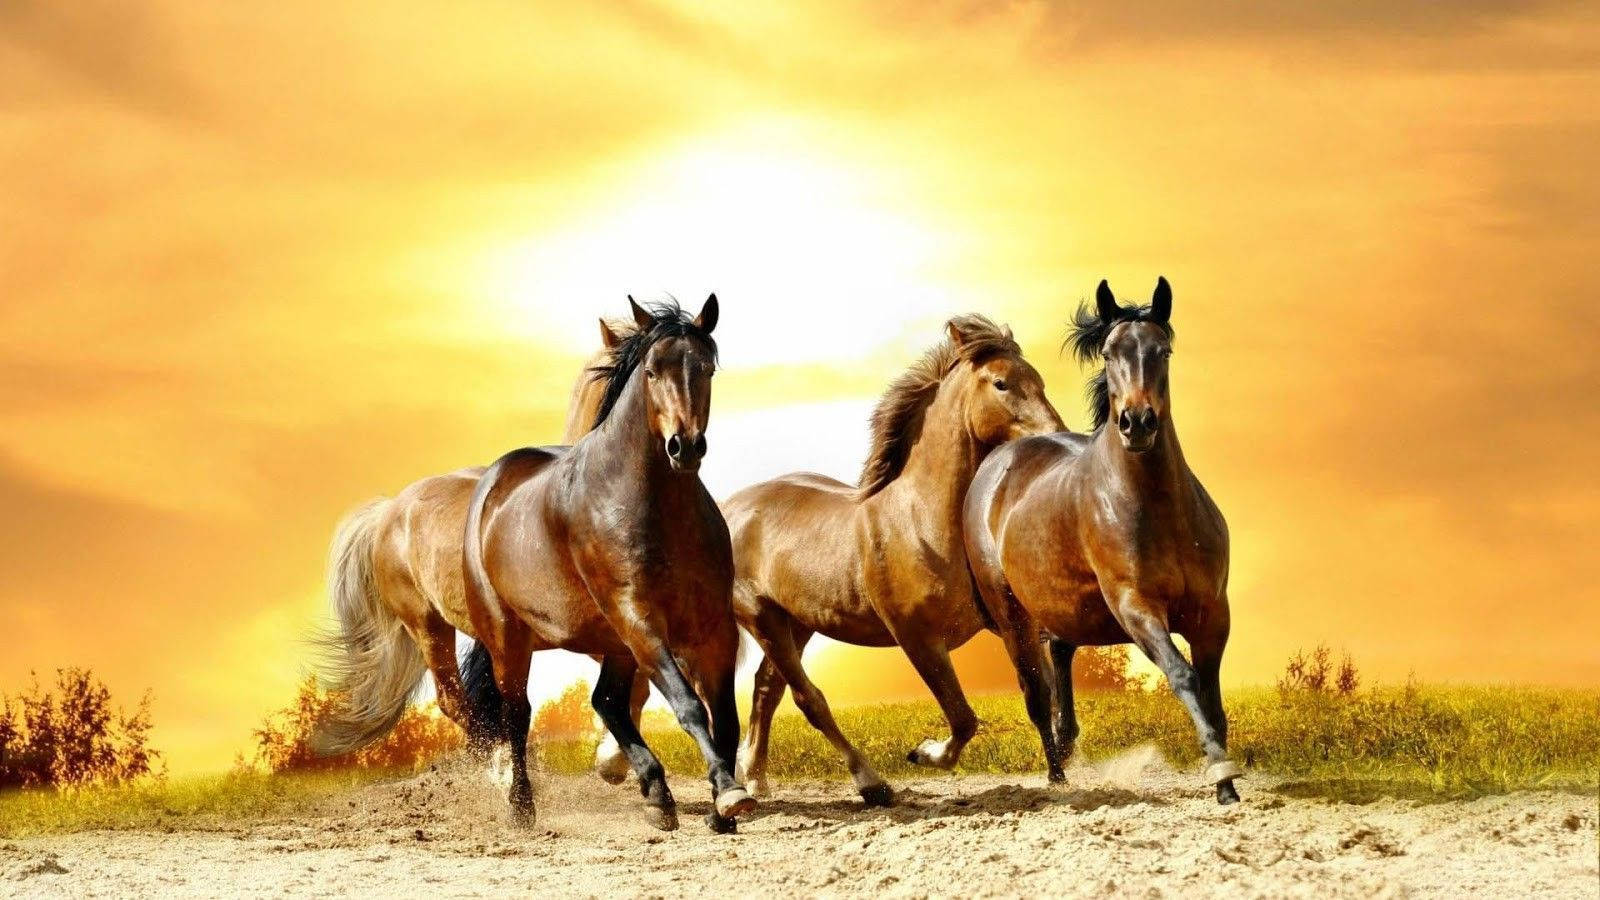 Cute Horses On A Sandy Field Background